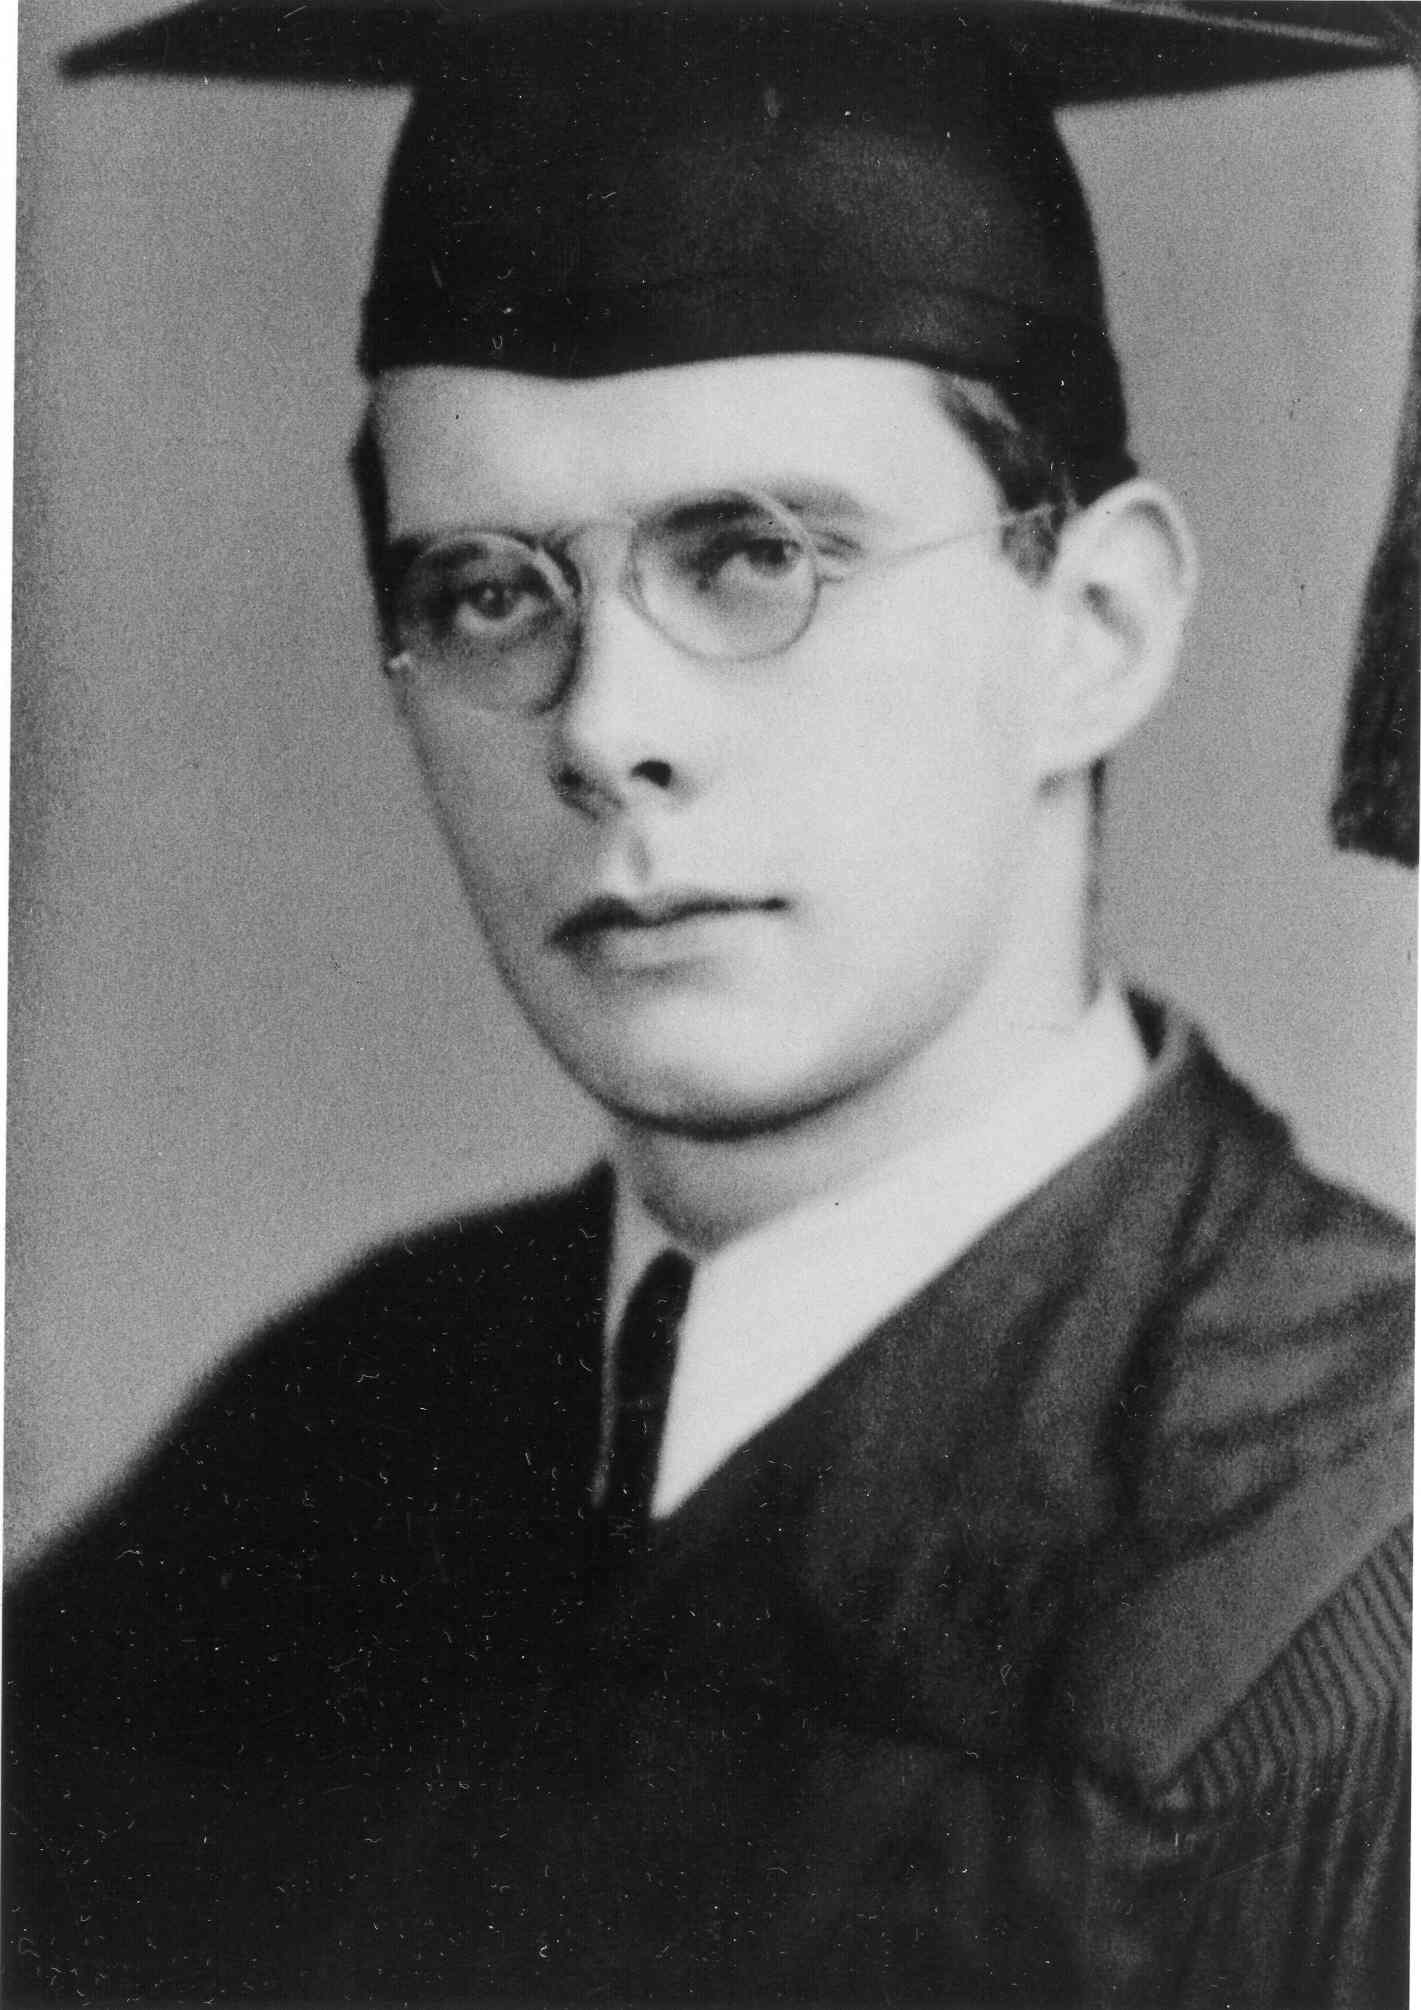 Irving Howe upon his graduation from CCNY.